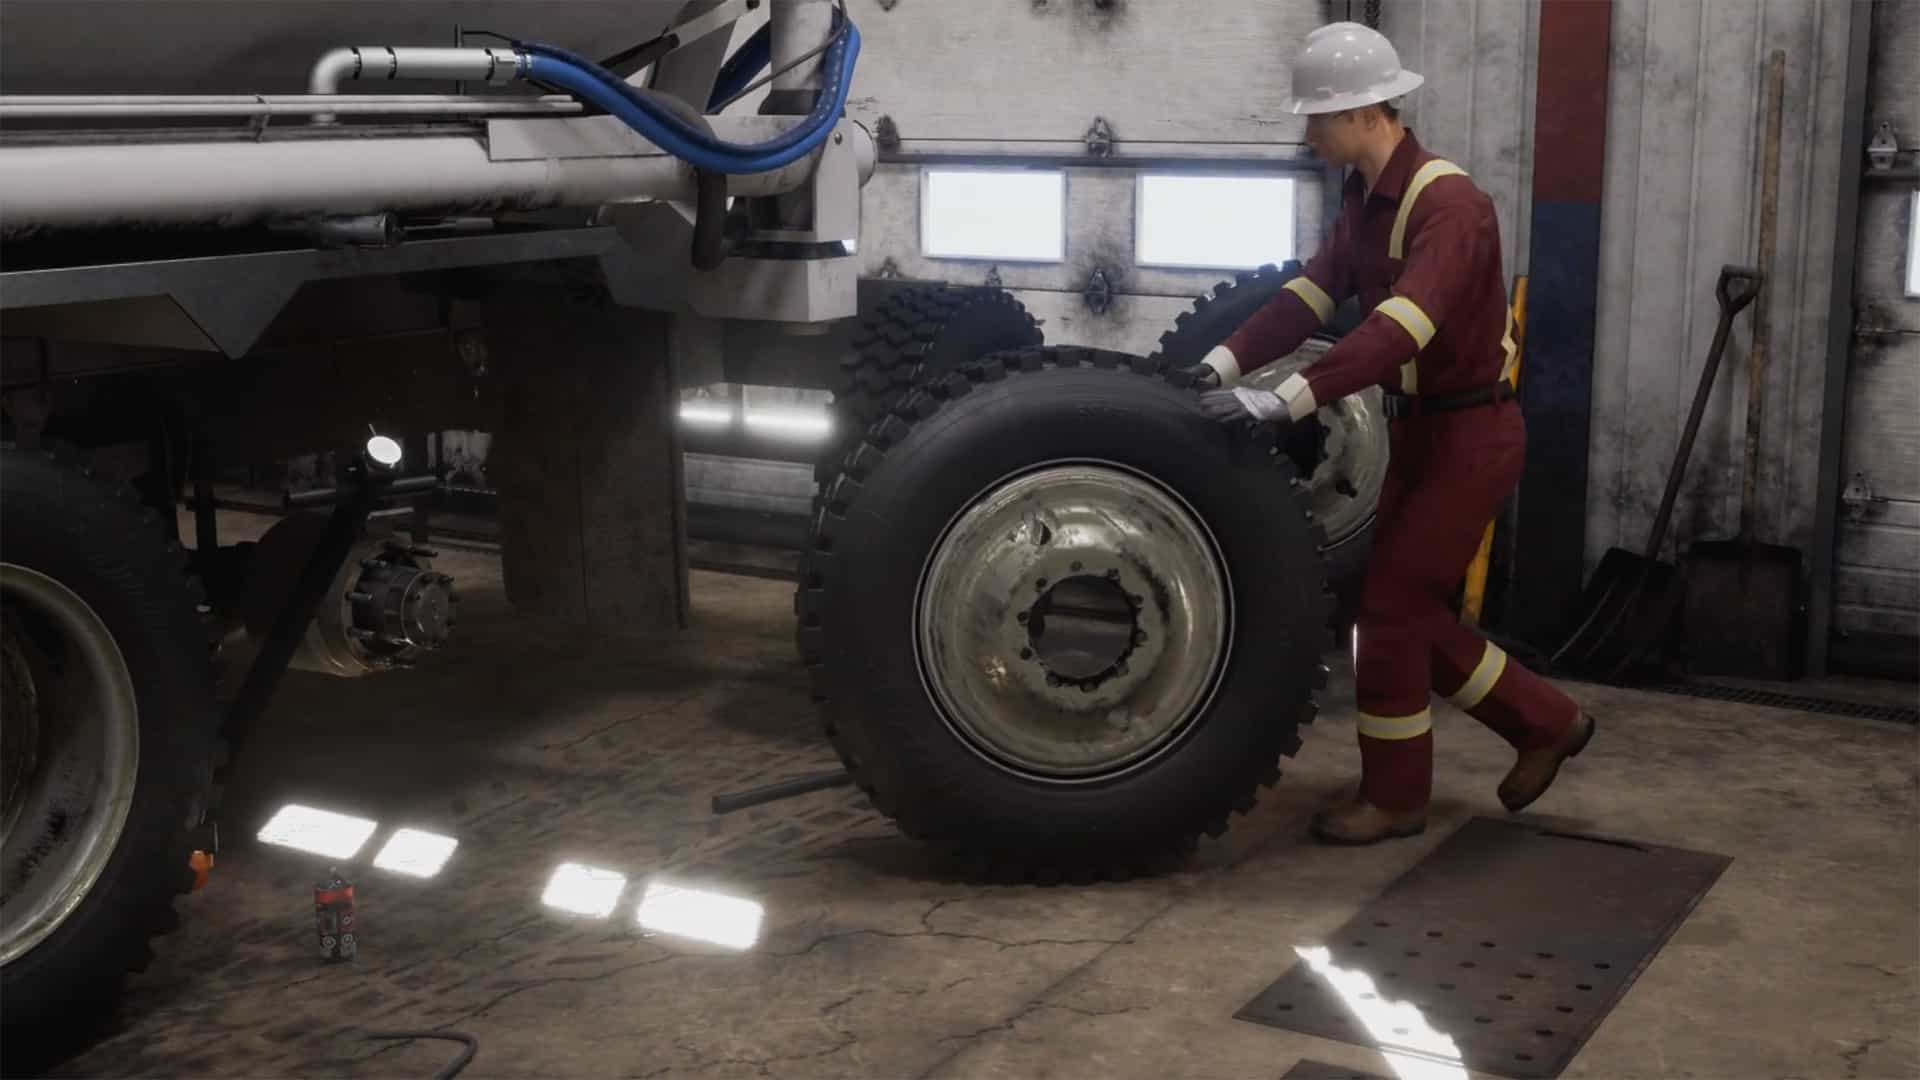 Truck Repair Shop Health and Safety Animation